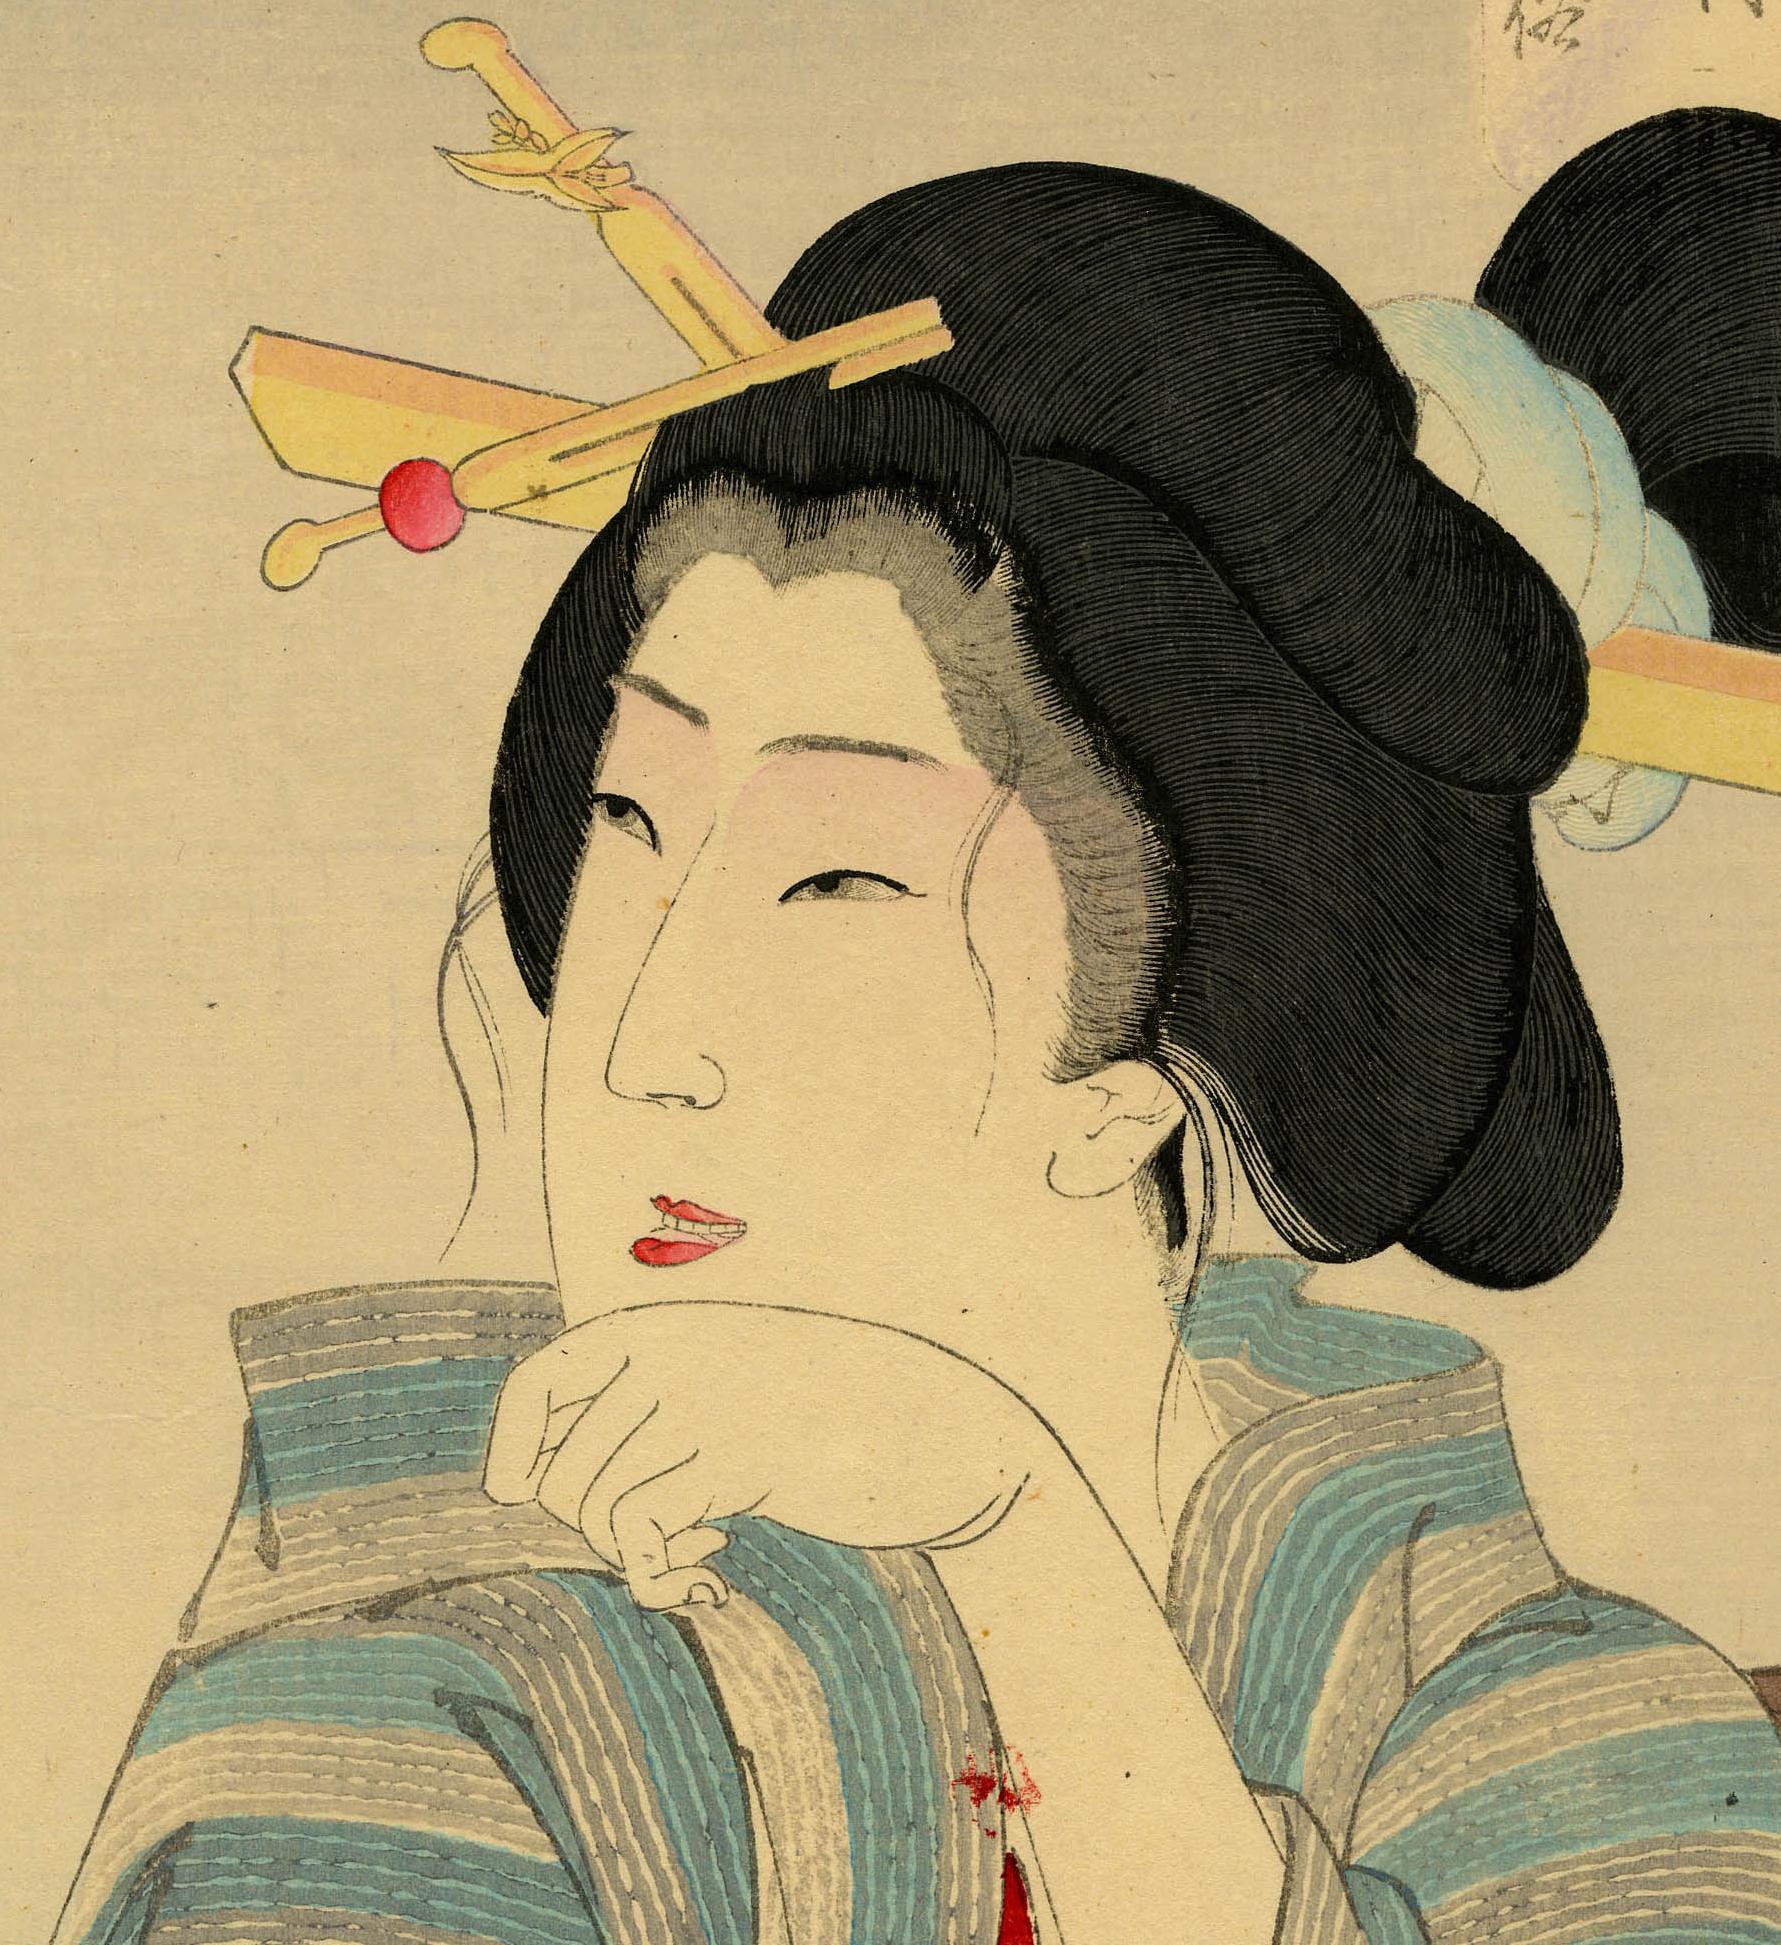 Tasty: The Appearance of a Prostitute during the Kaei Era - Print by Taiso Yoshitoshi